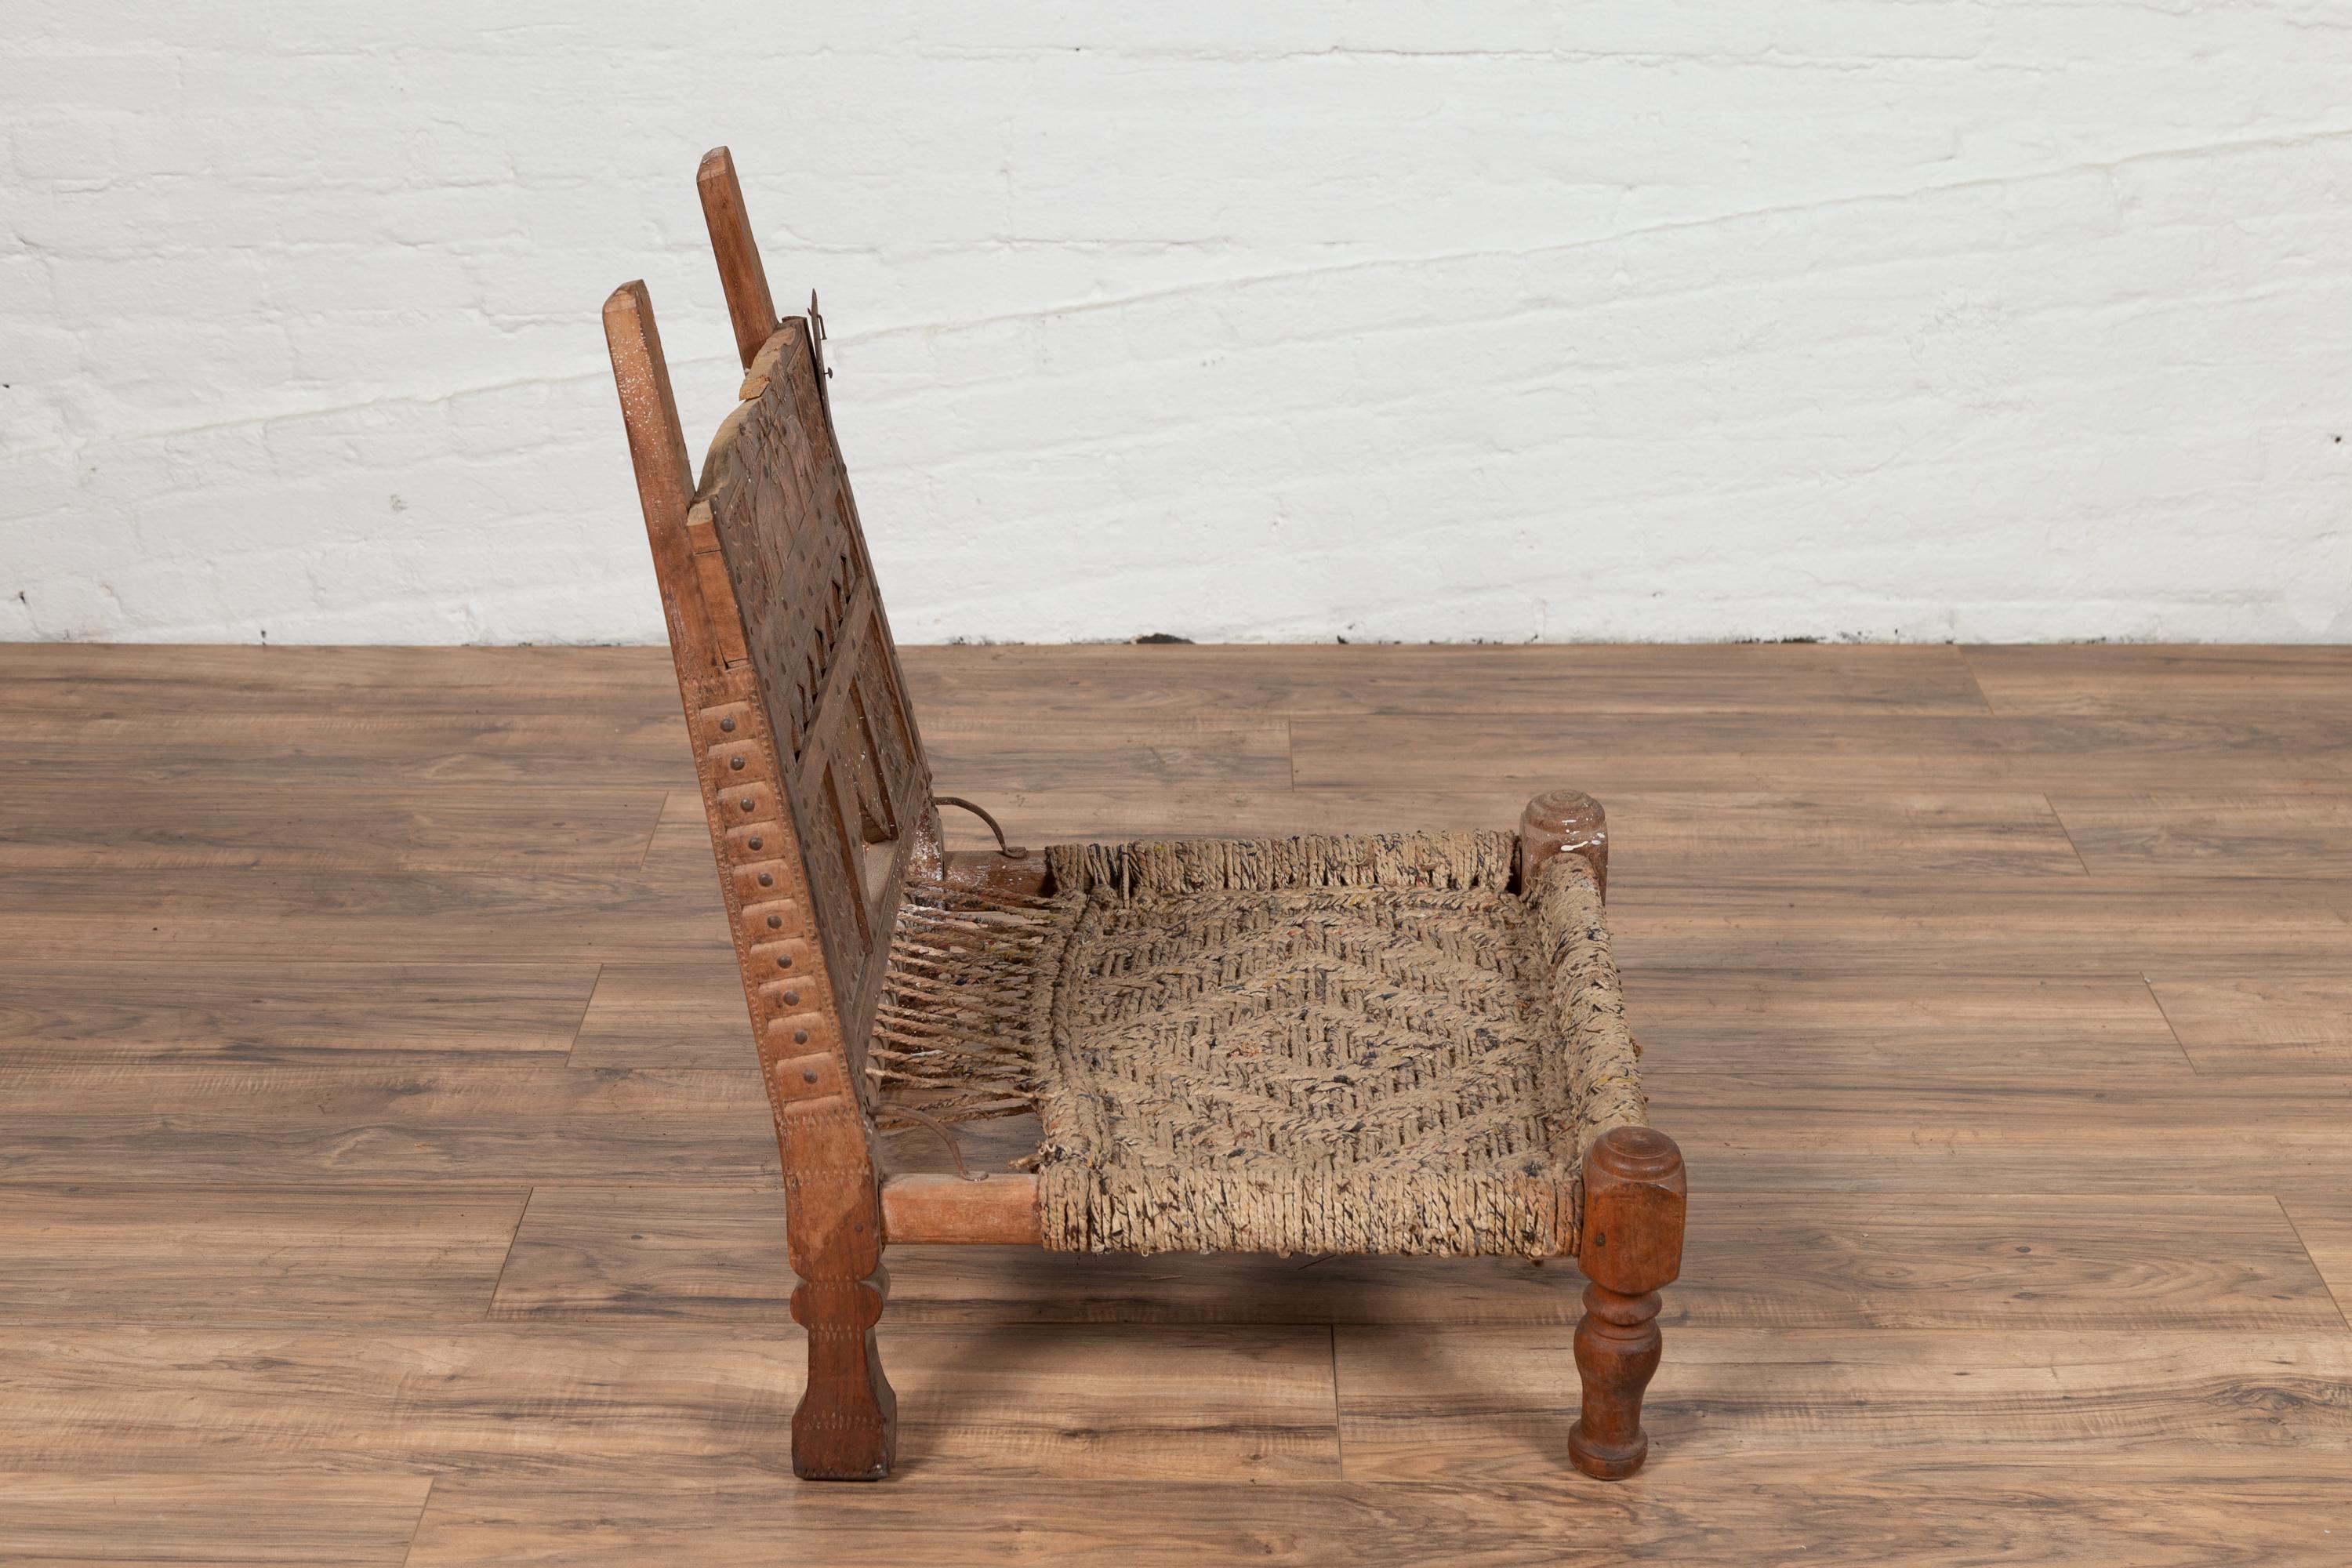 Rustic Indian Low Wooden Chair with Rope Seat and Weathered Appearance For Sale 2